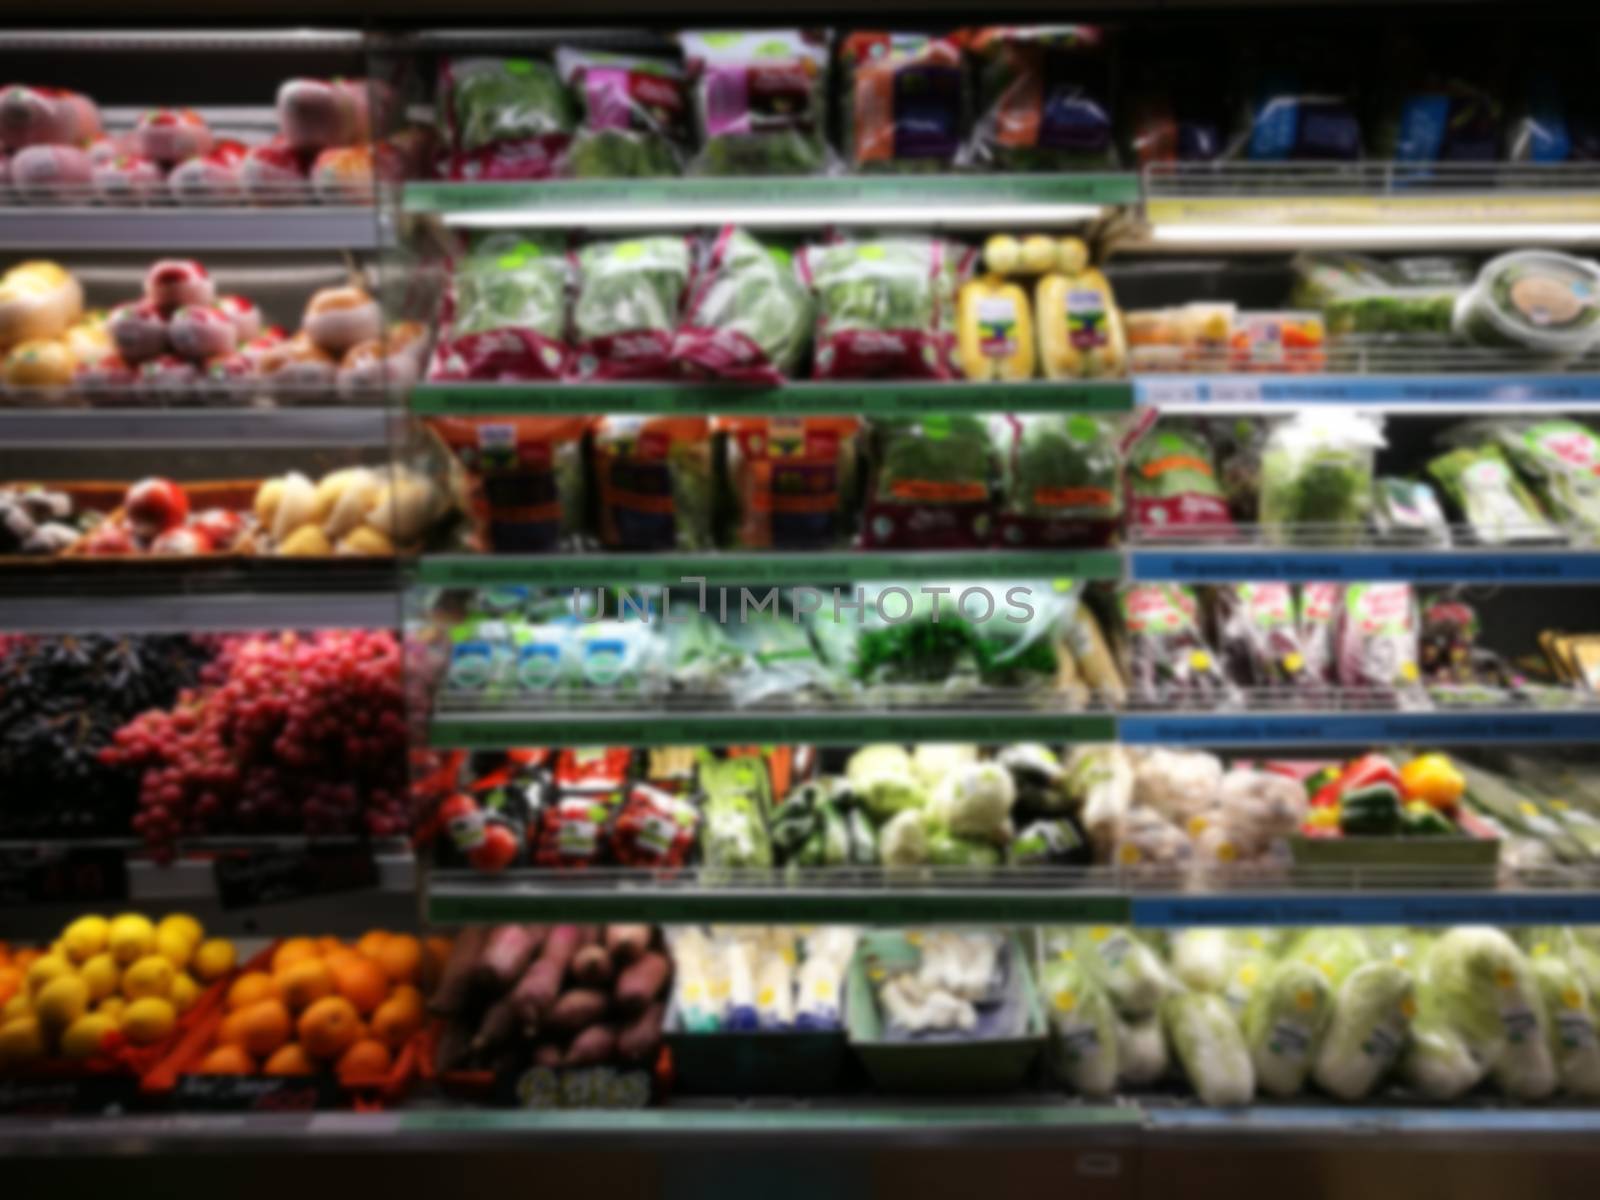 Blurred of product shelves in supermarket or grocery store, use as background
